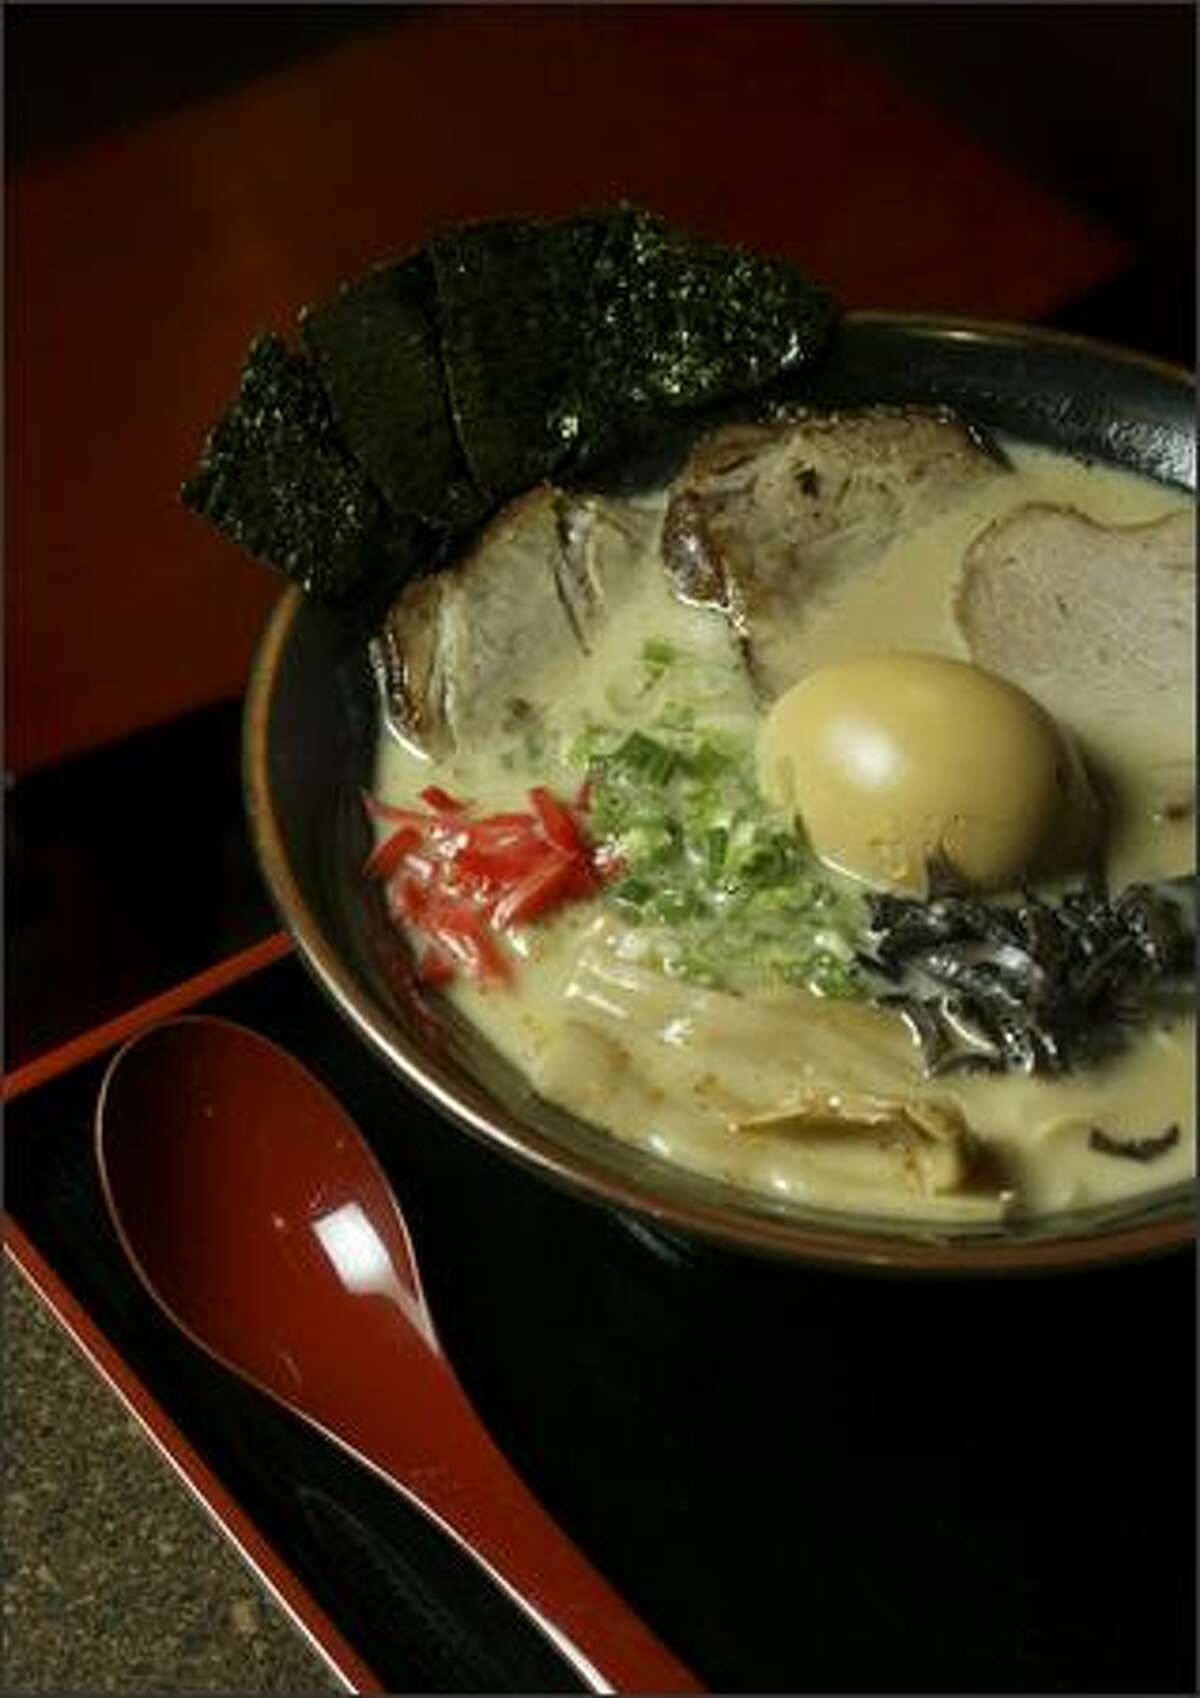 The Samurai Armour Bowl can be ordered with pork, chicken or fish broth. Toppings include pork slices, green onion, black mushrooms, flavored egg and roasted seaweed.